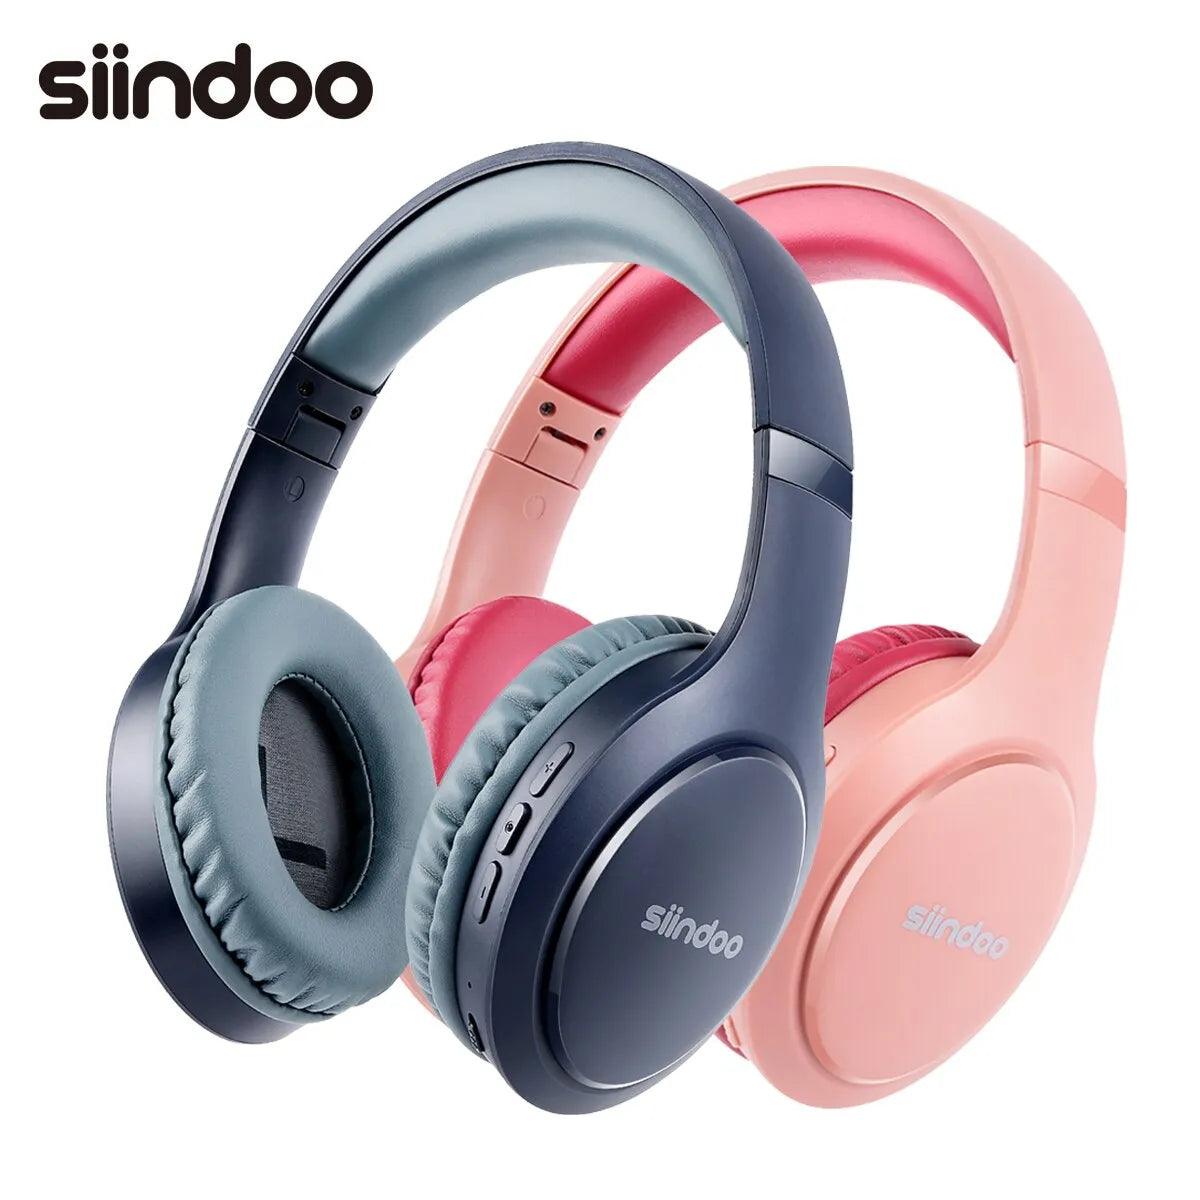 Pink&Blue Siindoo JH-919 Wireless Bluetooth Headphones - Foldable Stereo Earphones with Super Bass and Noise Cancelling Mic  ourlum.com   